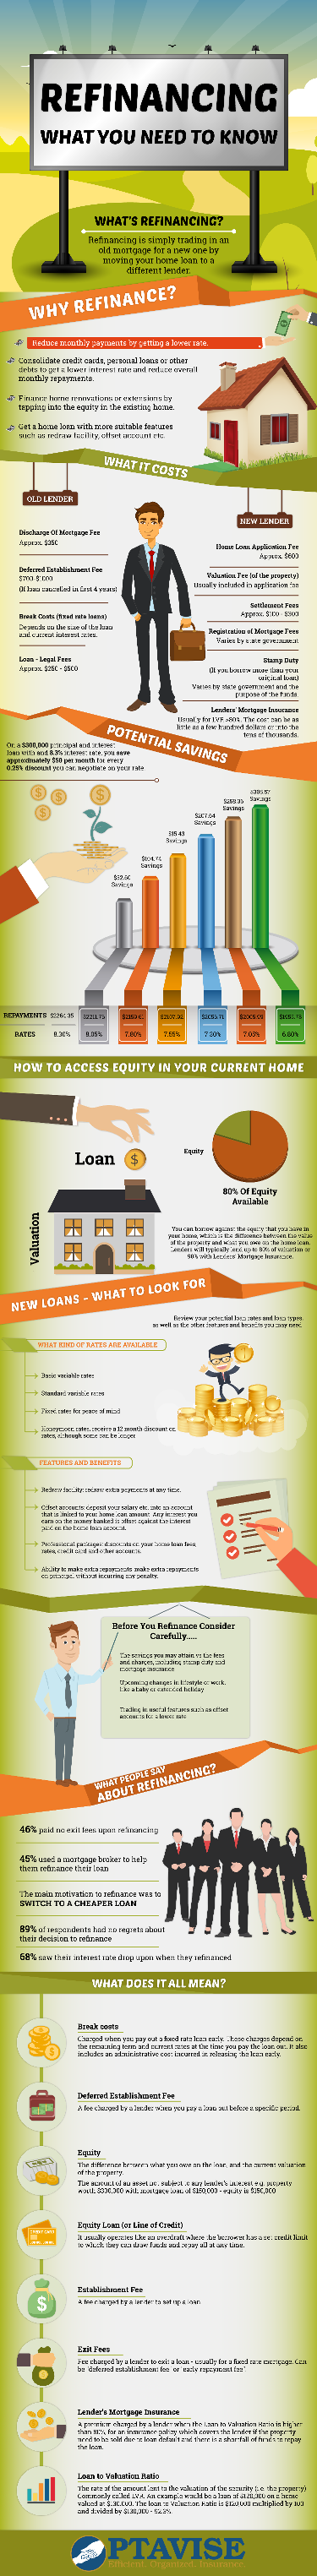 Refinancing What You Need To Know